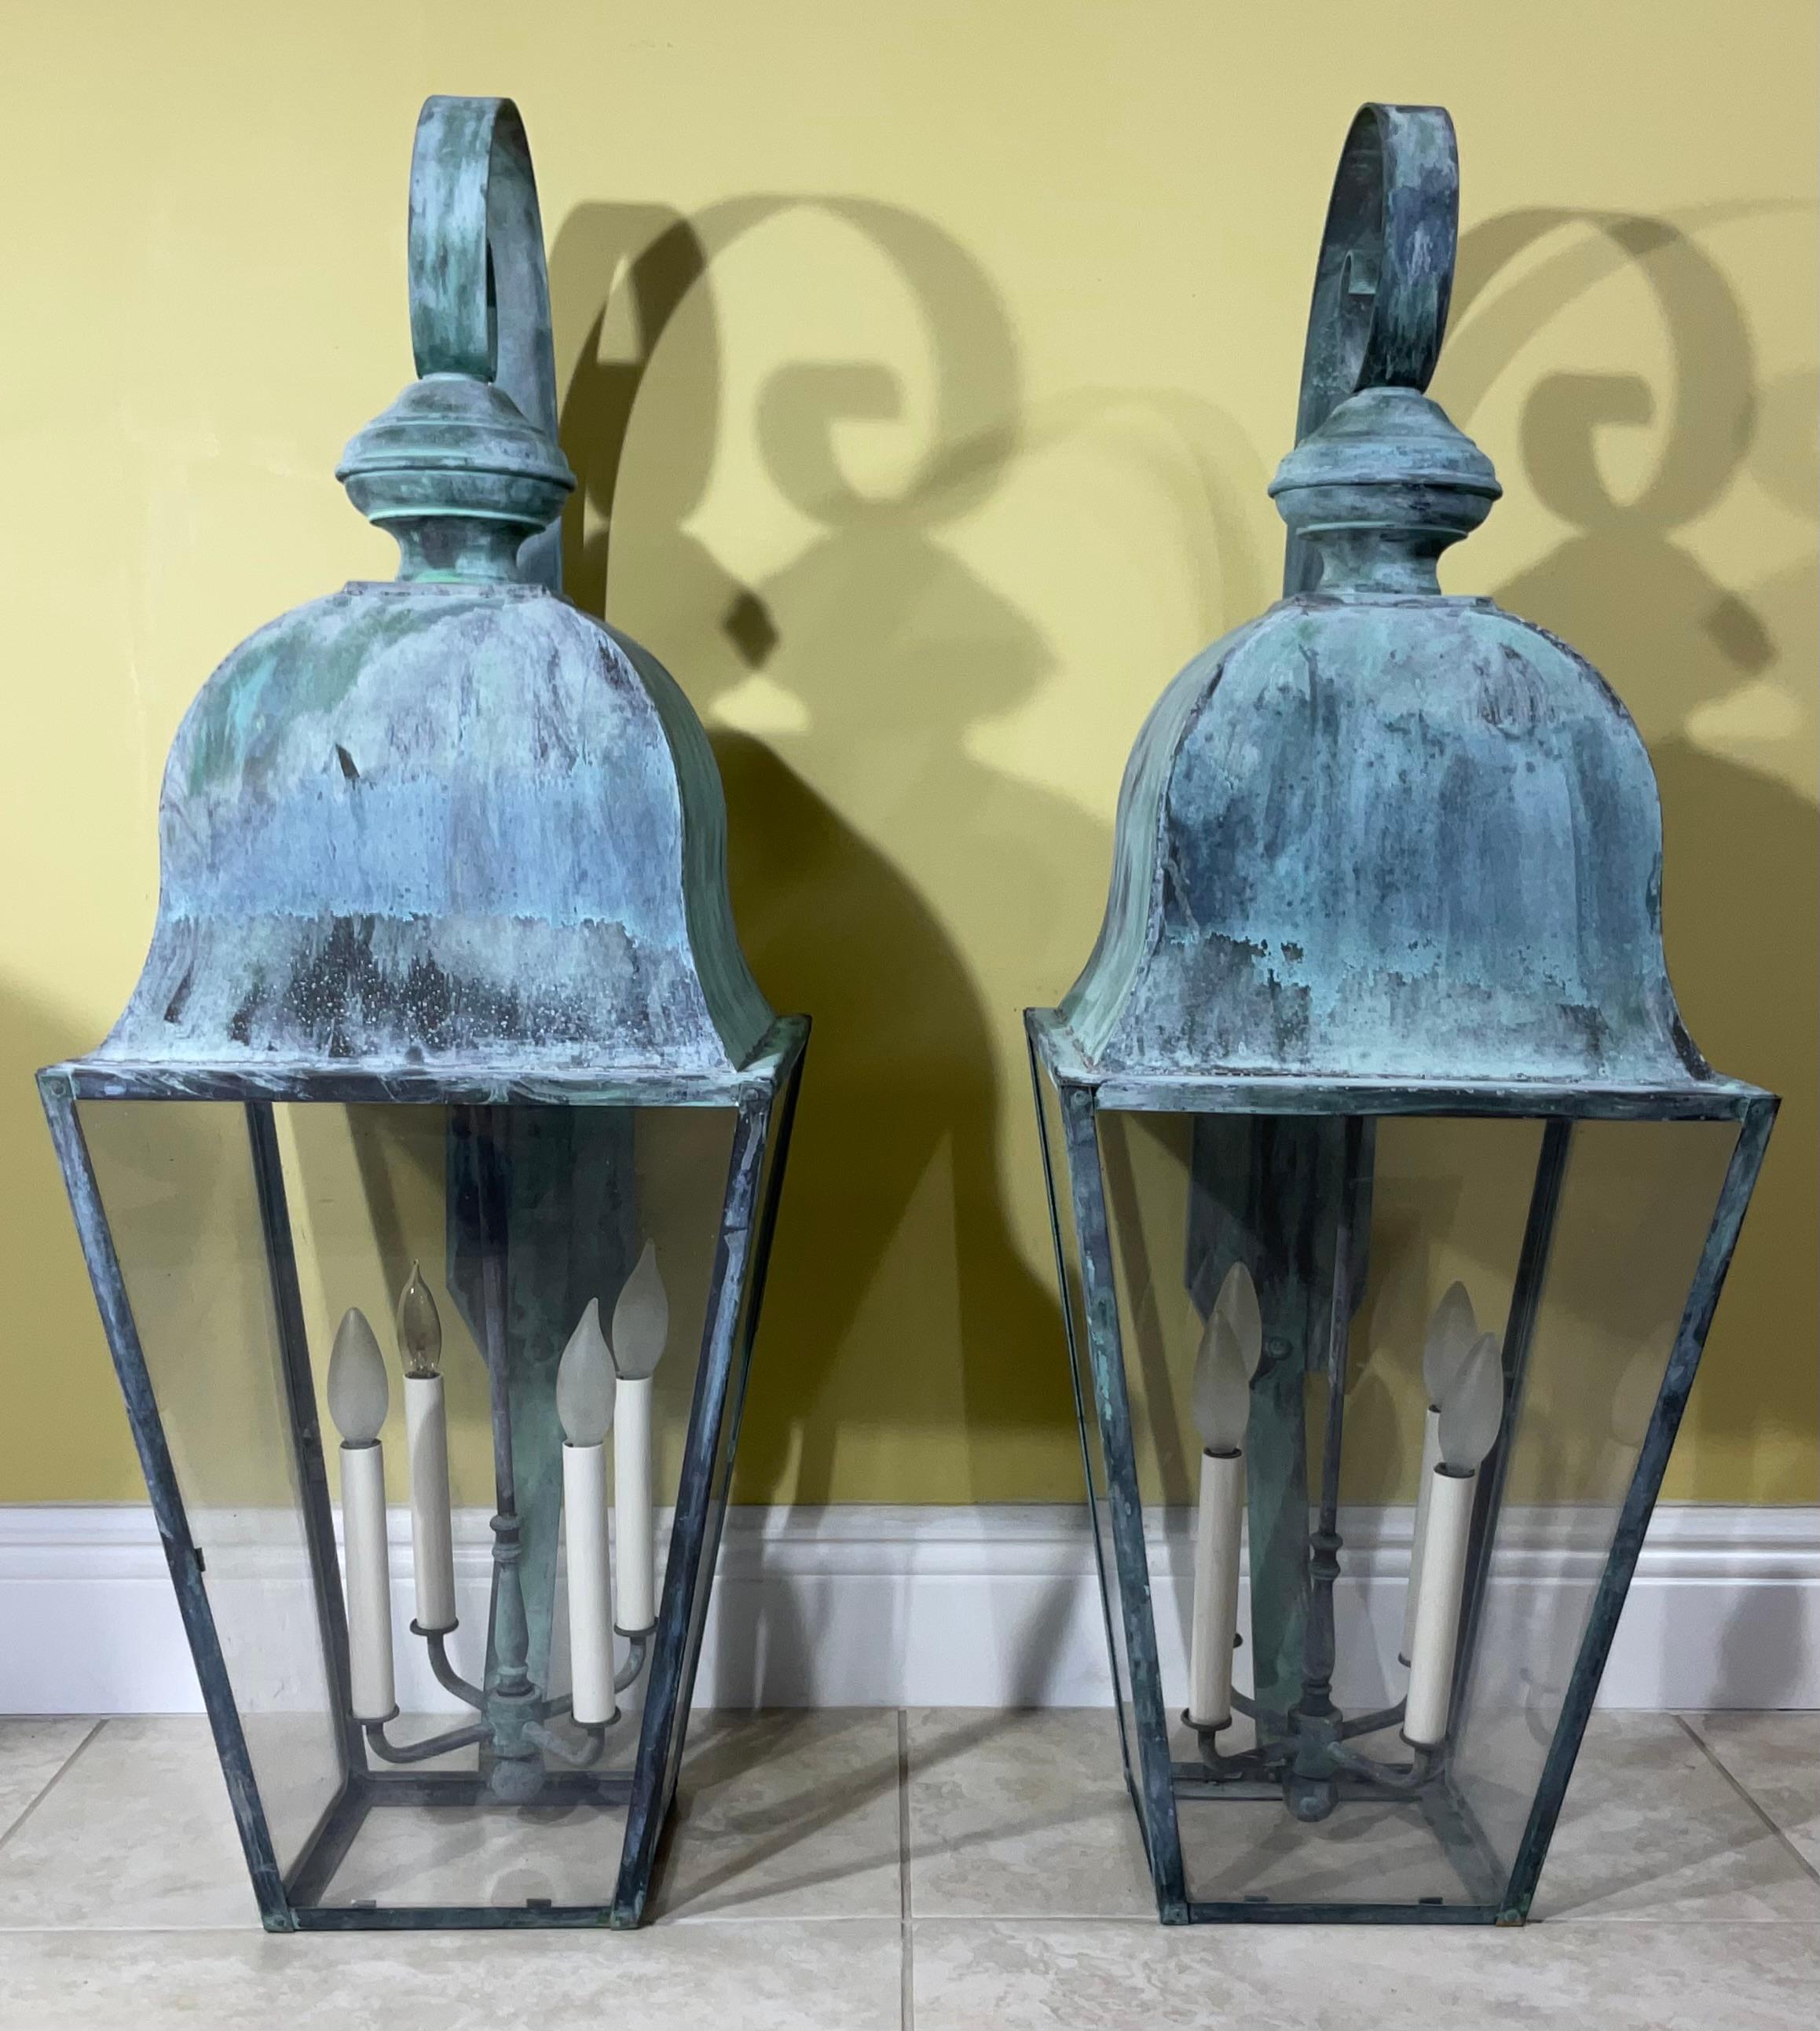 Hand-Crafted Large Pair of Vintage Handcrafted Wall-Mounted Solid Brass Lantern